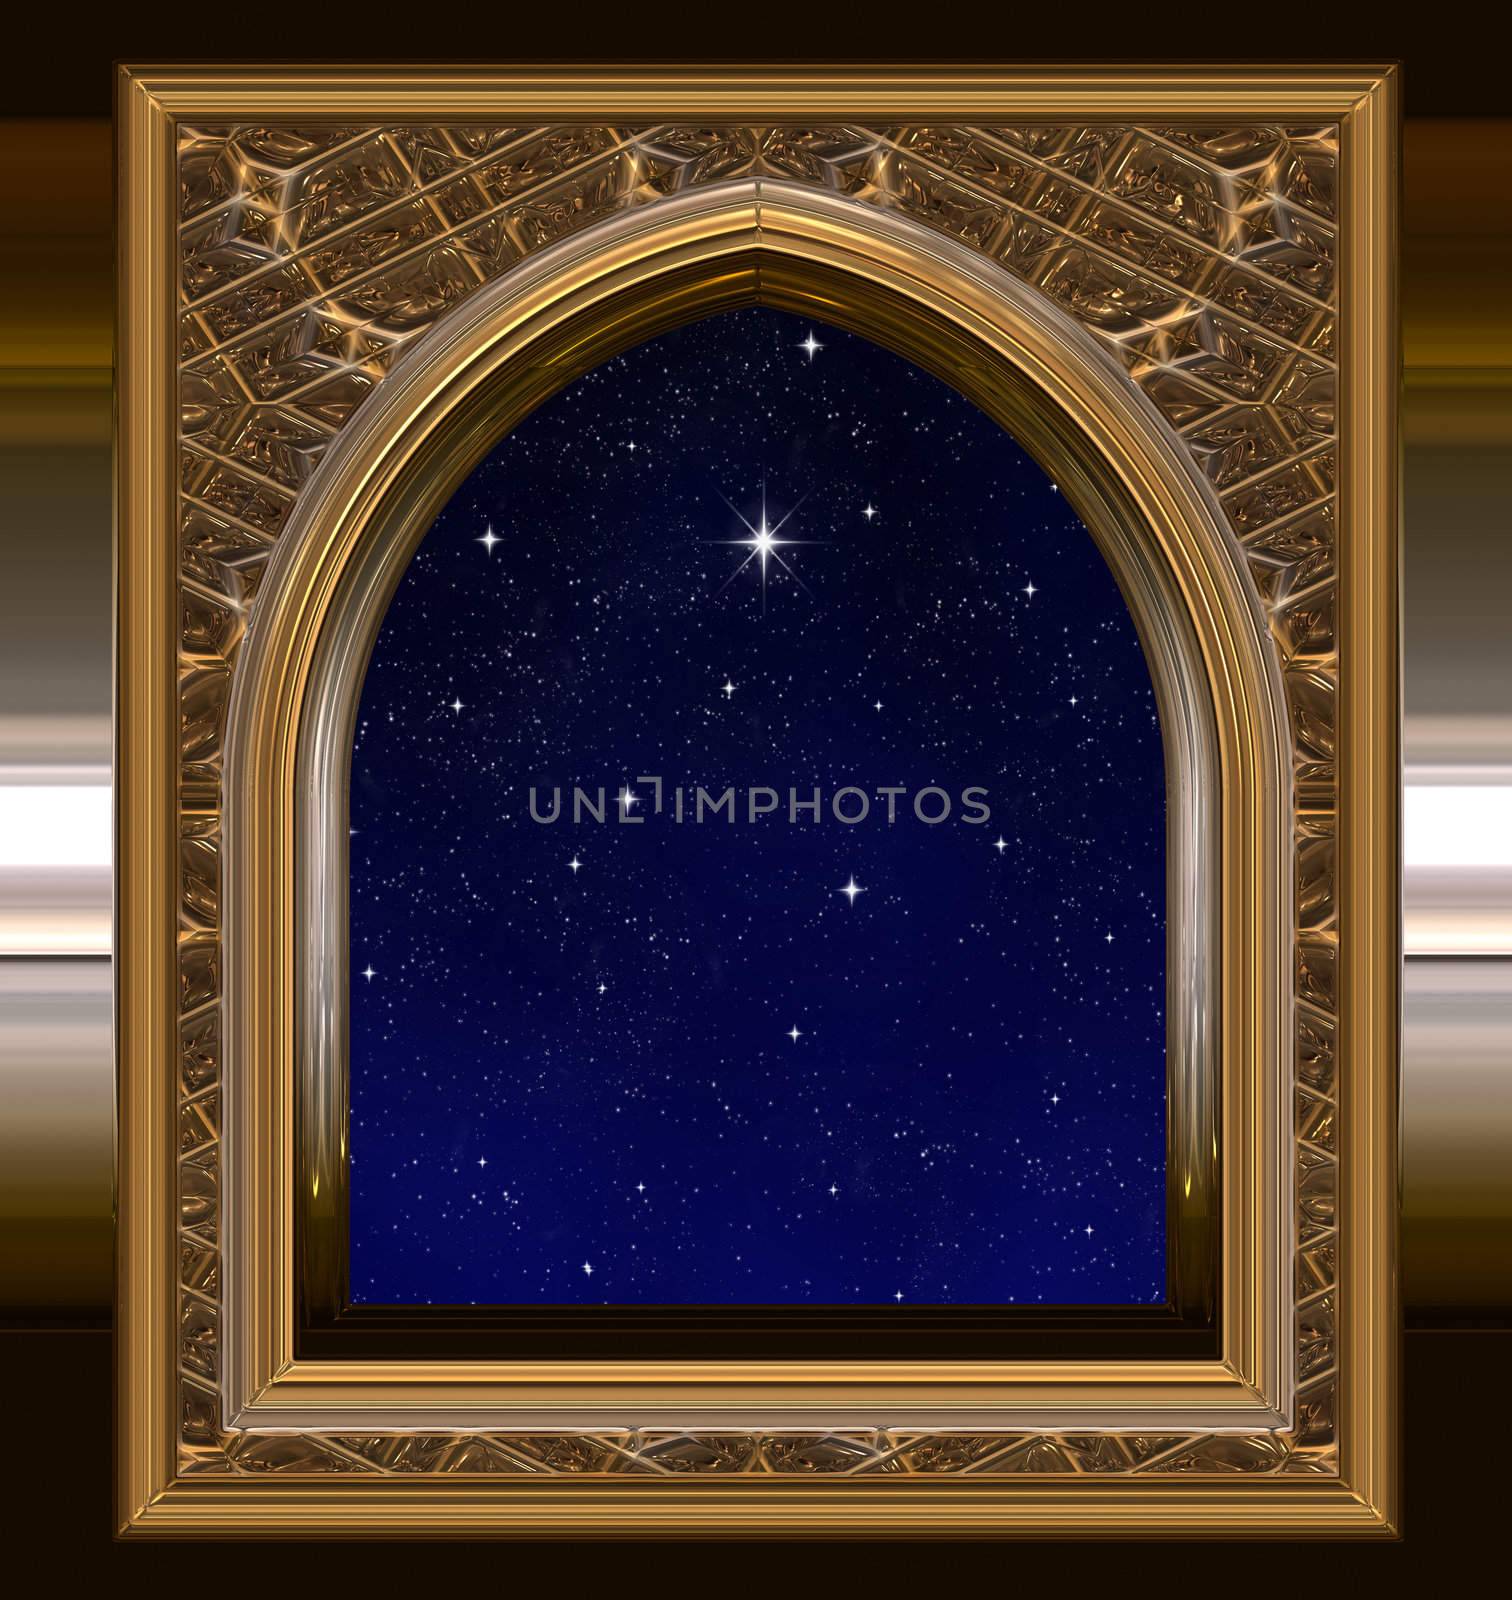 gothic or science fiction window looking into starry night sky with wishing star